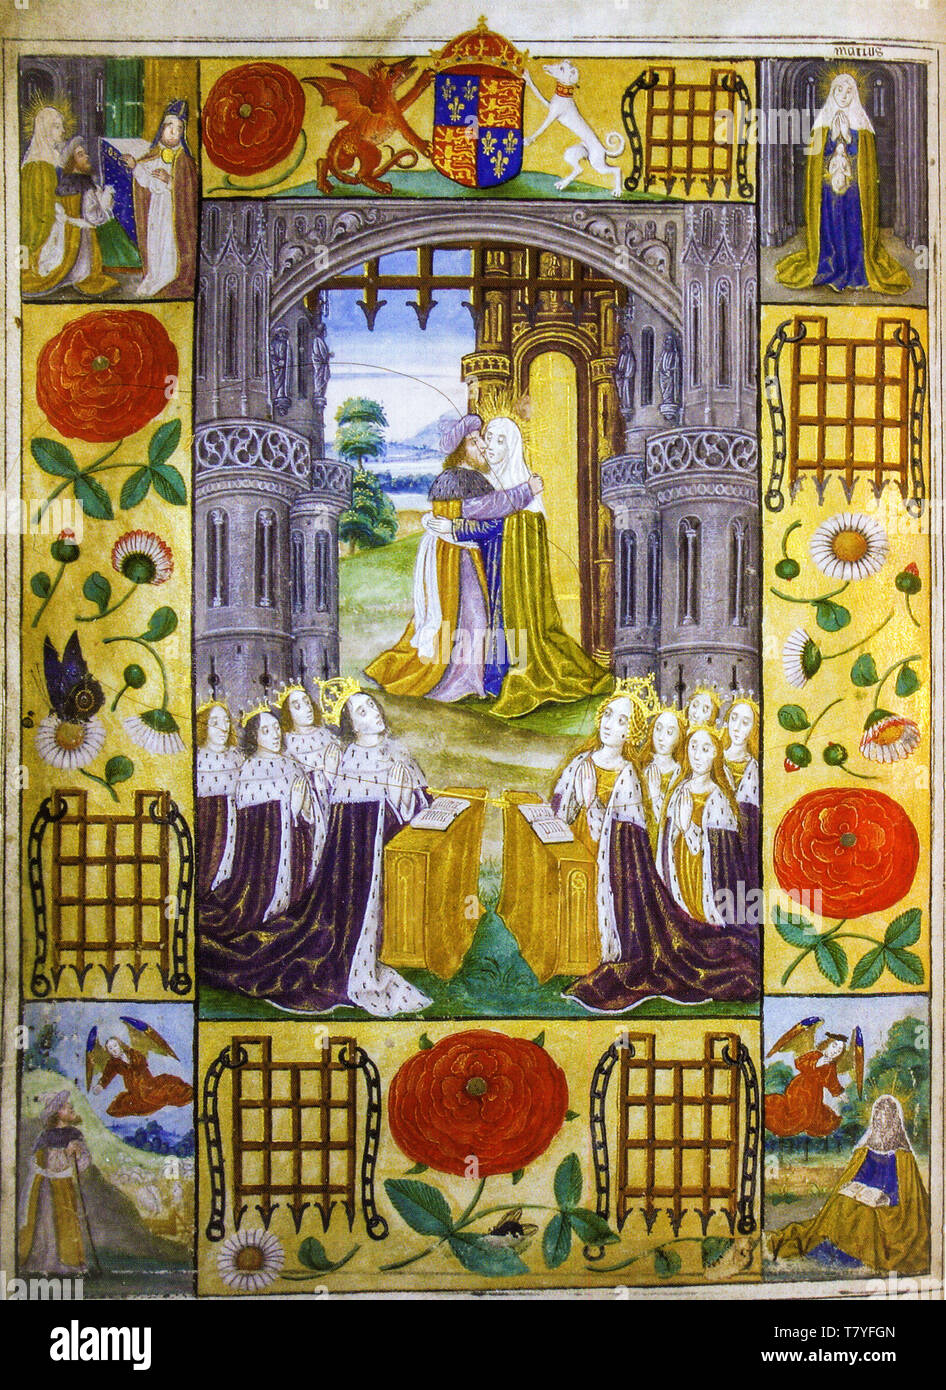 The royal family of Henry VII of England with Joachim and Anne meeting at the Golden Gate, illuminated page, 1503 Stock Photo